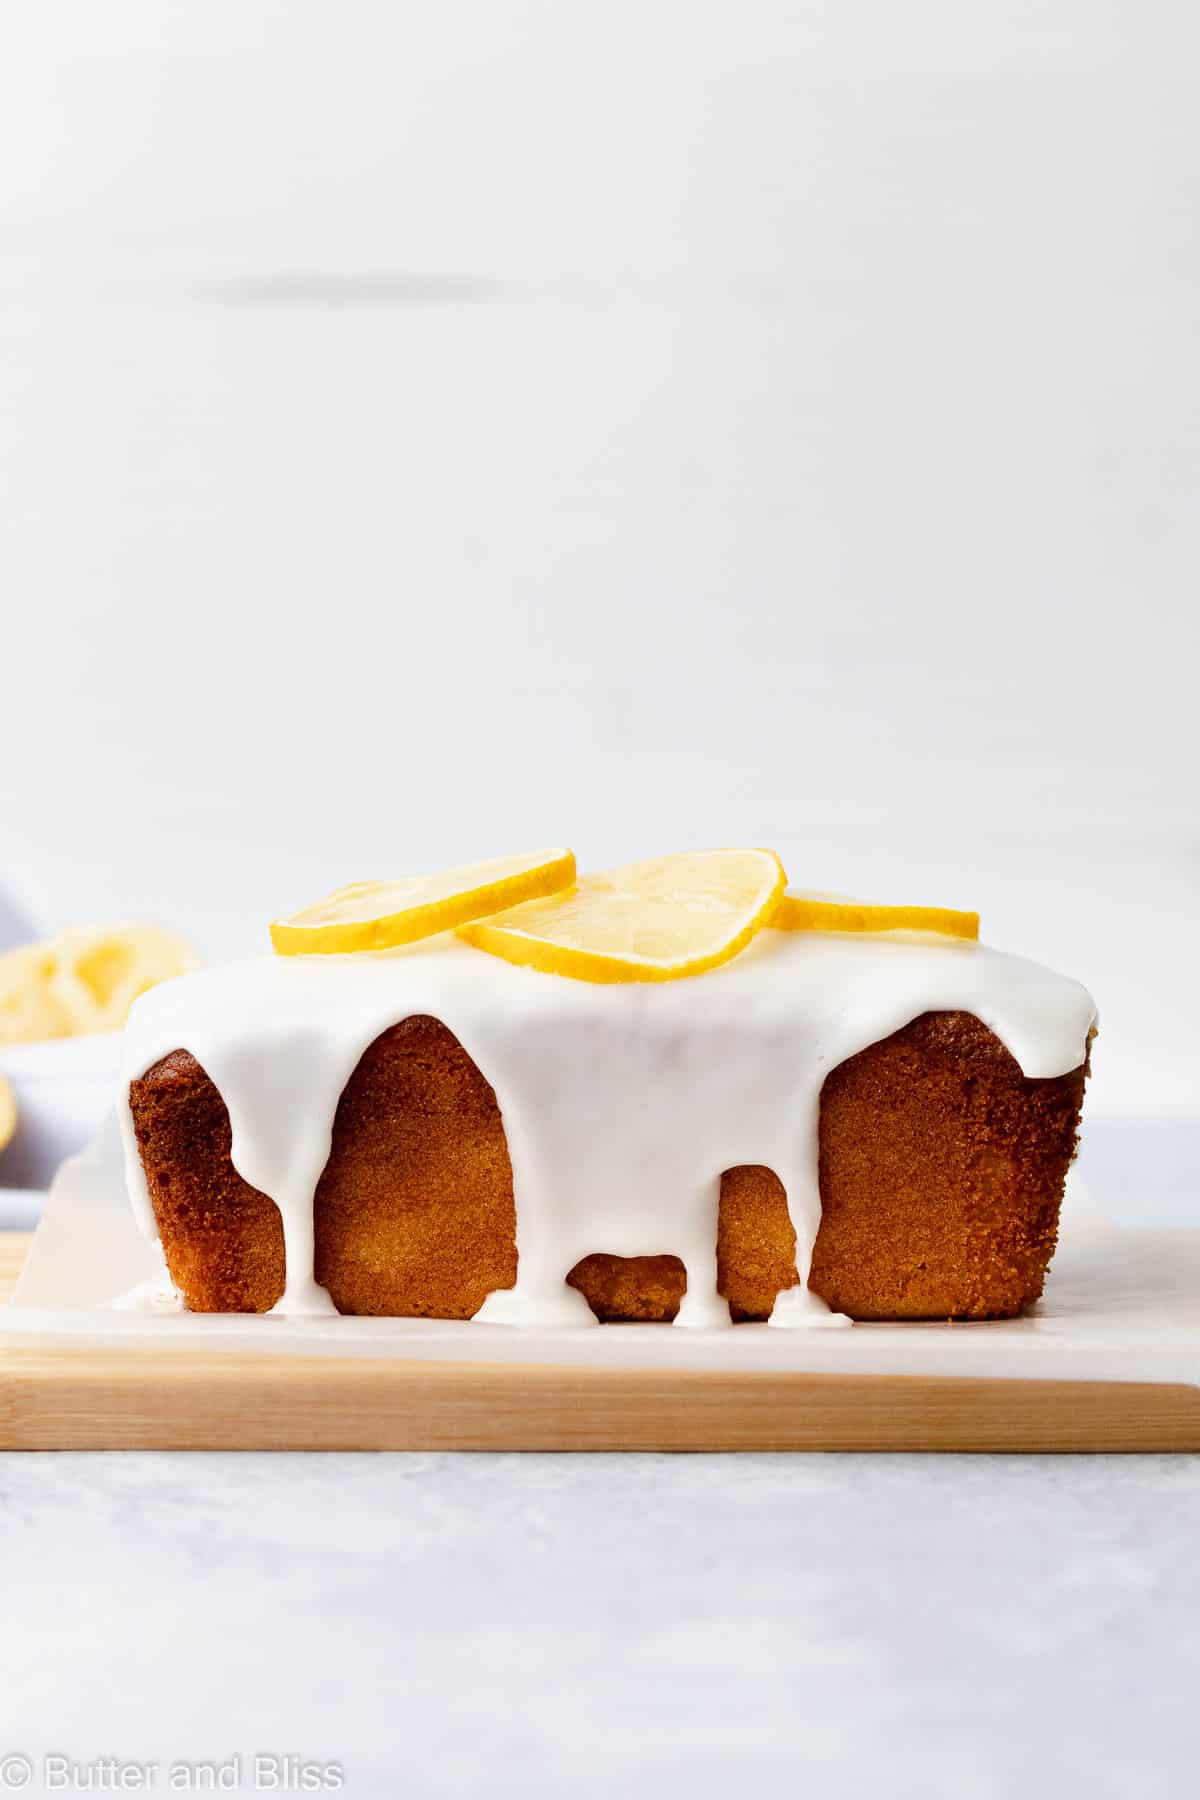 Side view of a mini iced gluten free lemon loaf on a wood cutting board